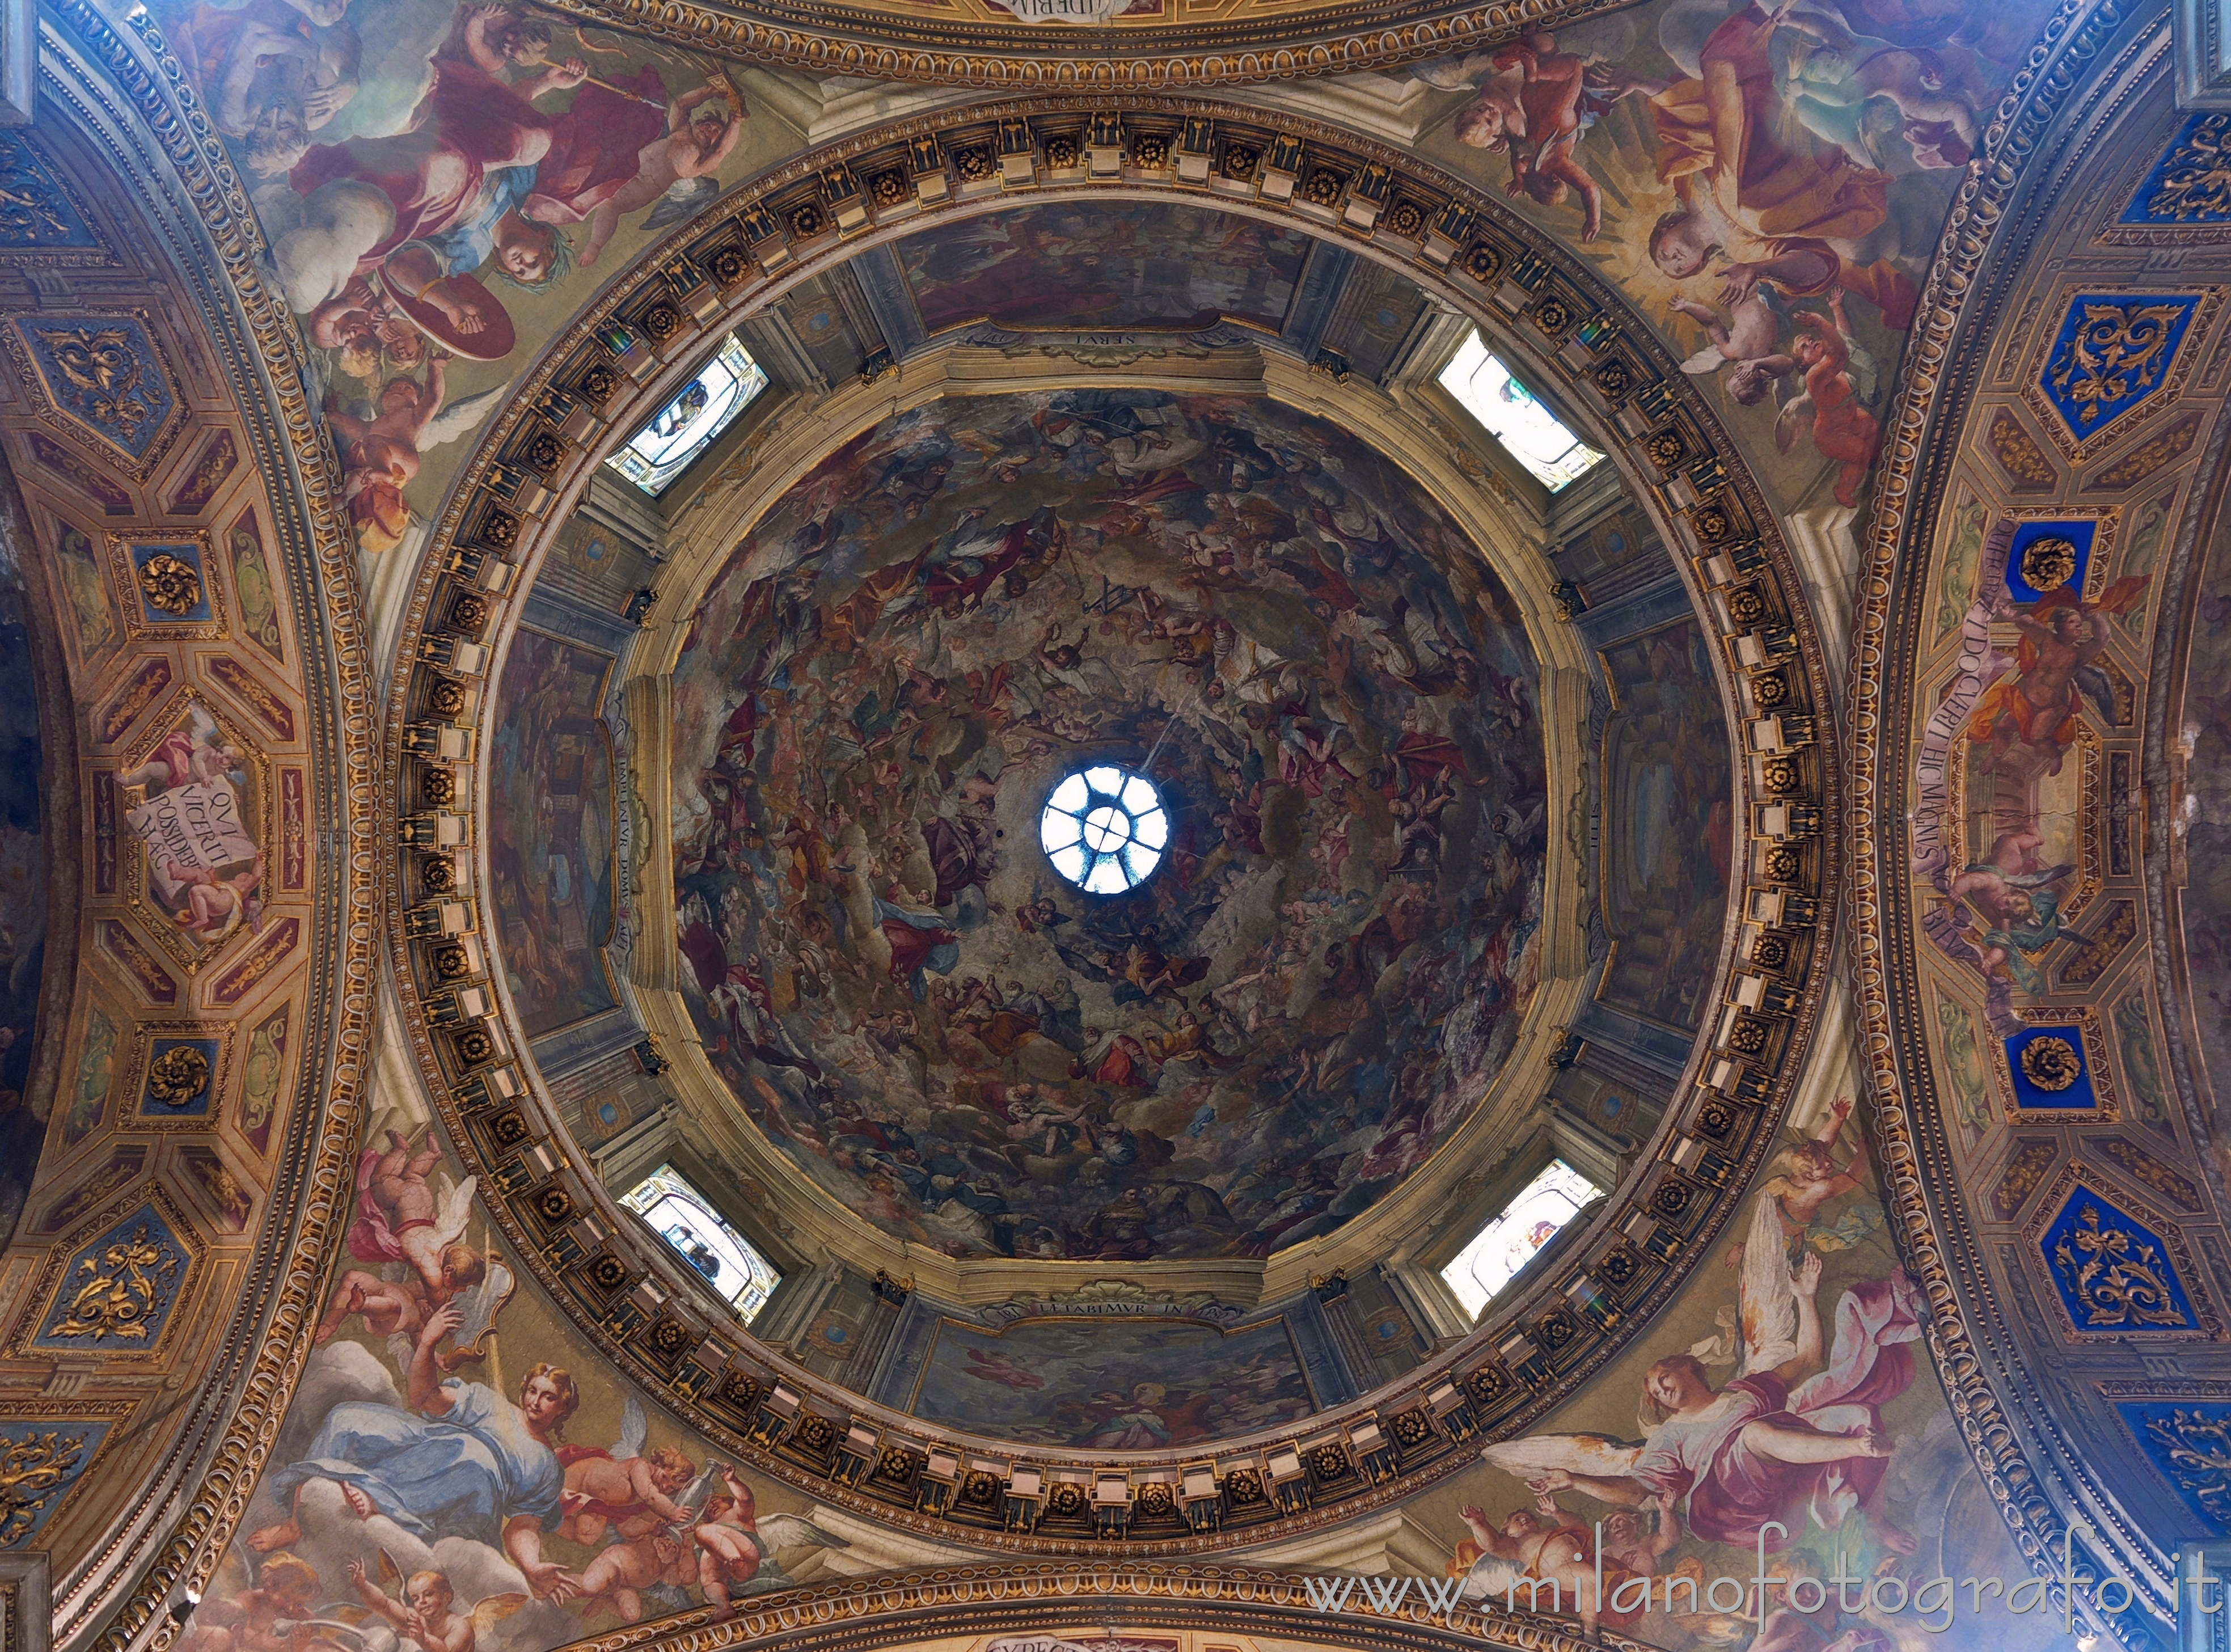 Milan (Italy): Central dome of the Church of Sant'Alessandro in Zebedia - Milan (Italy)